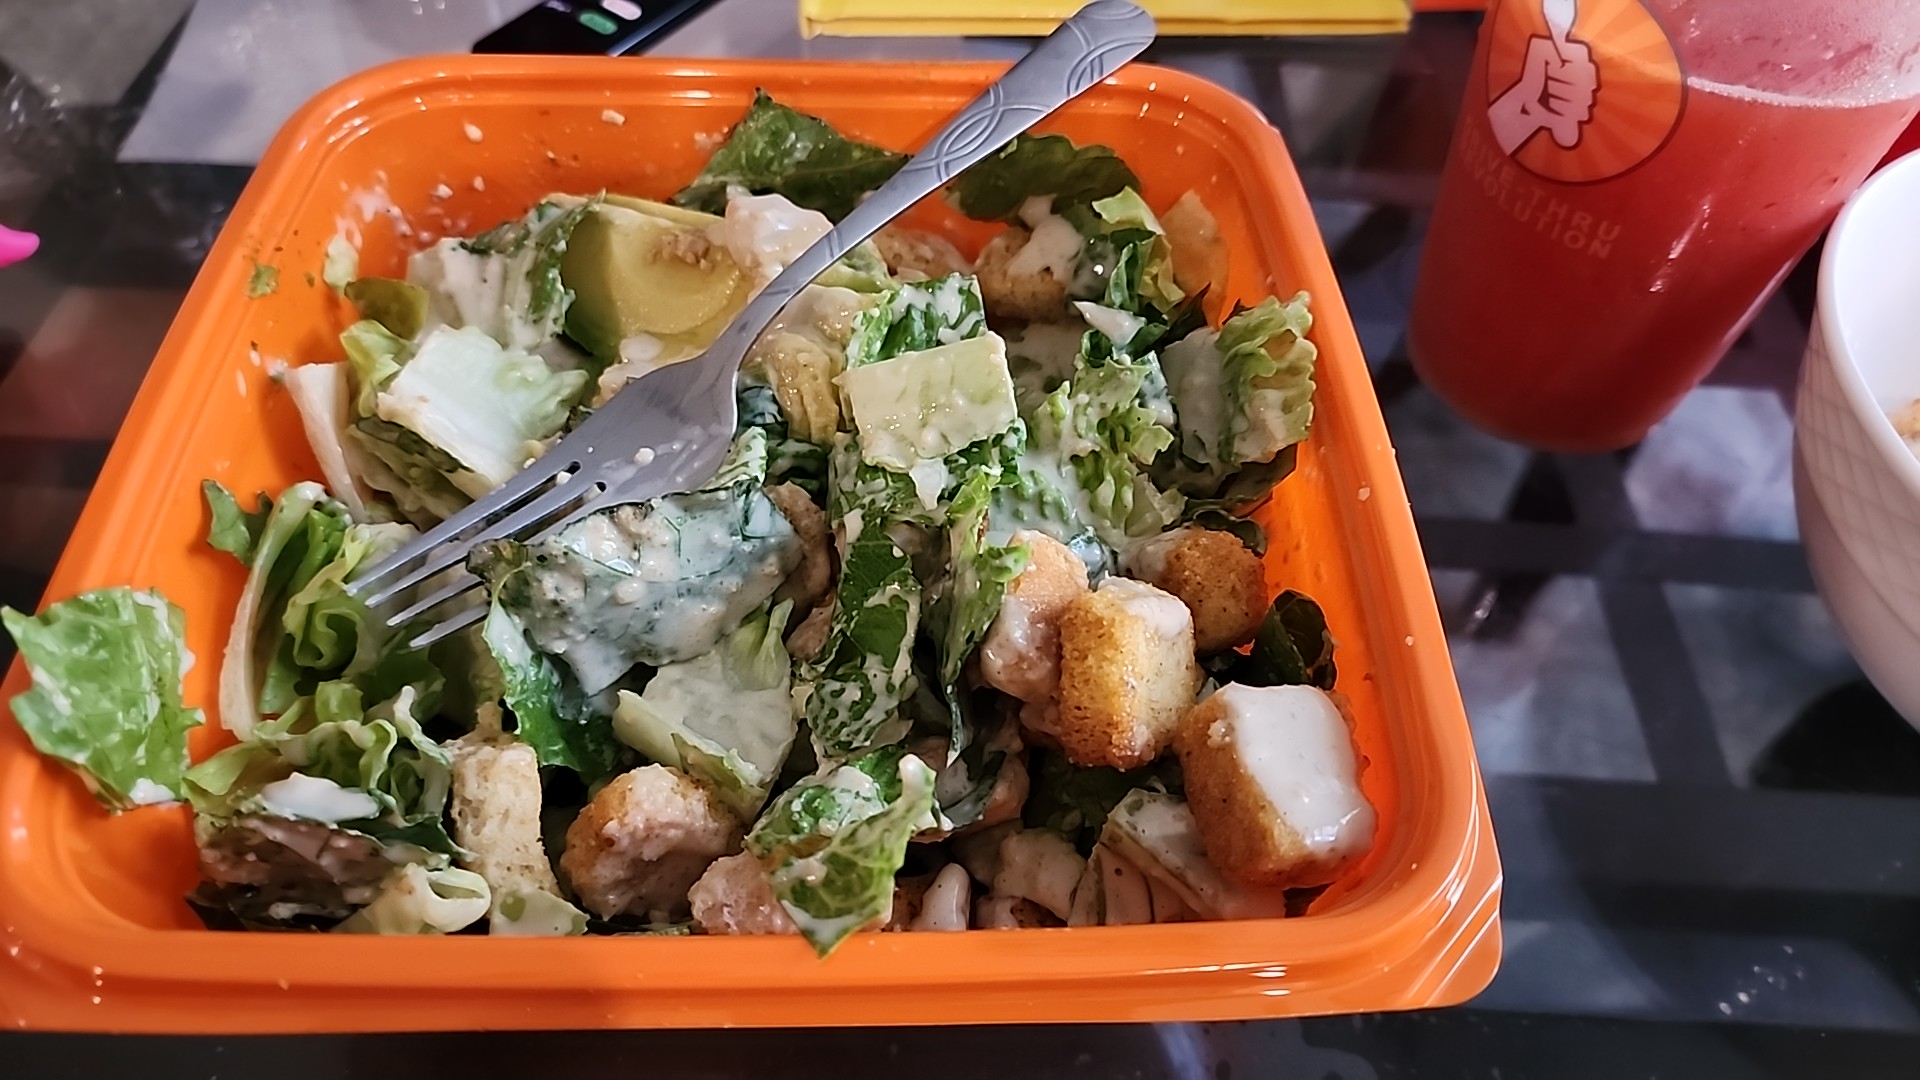 Salad and Go